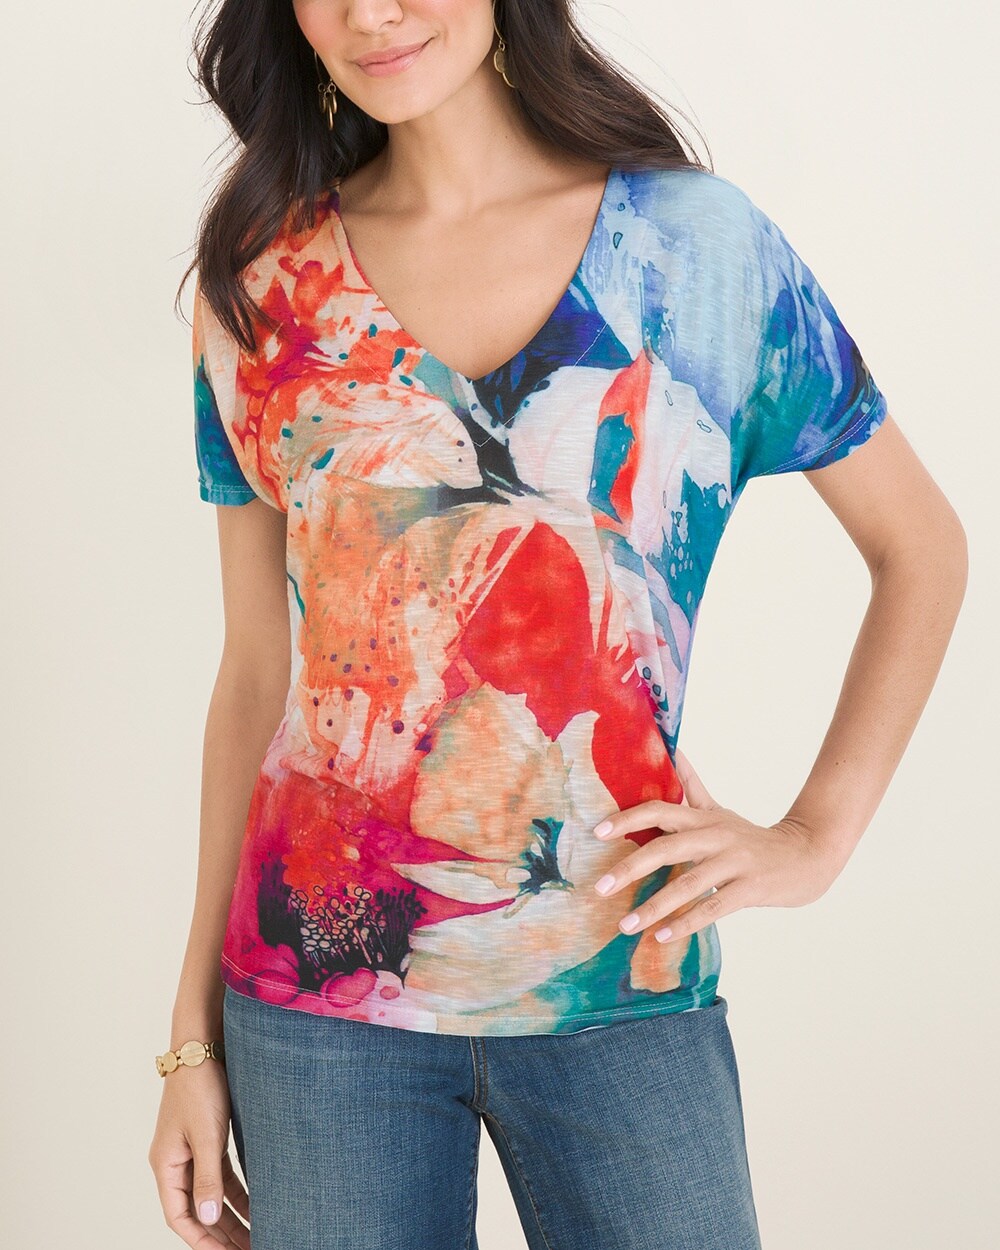 Artistic Floral Tee